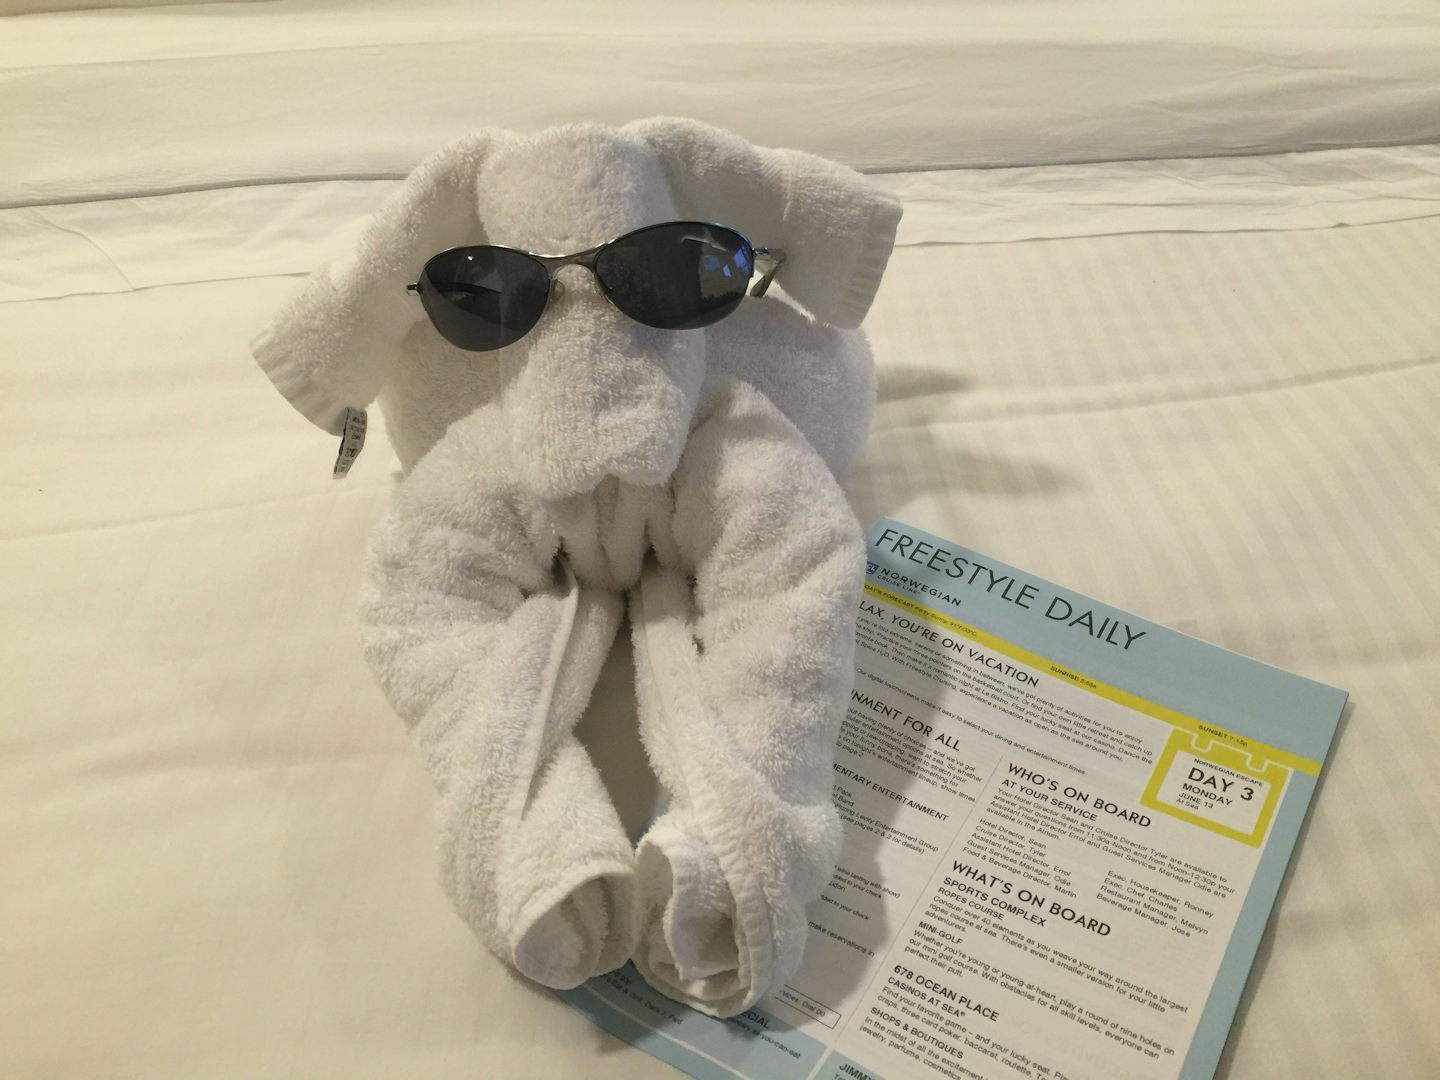 Towel animal left by our room steward.